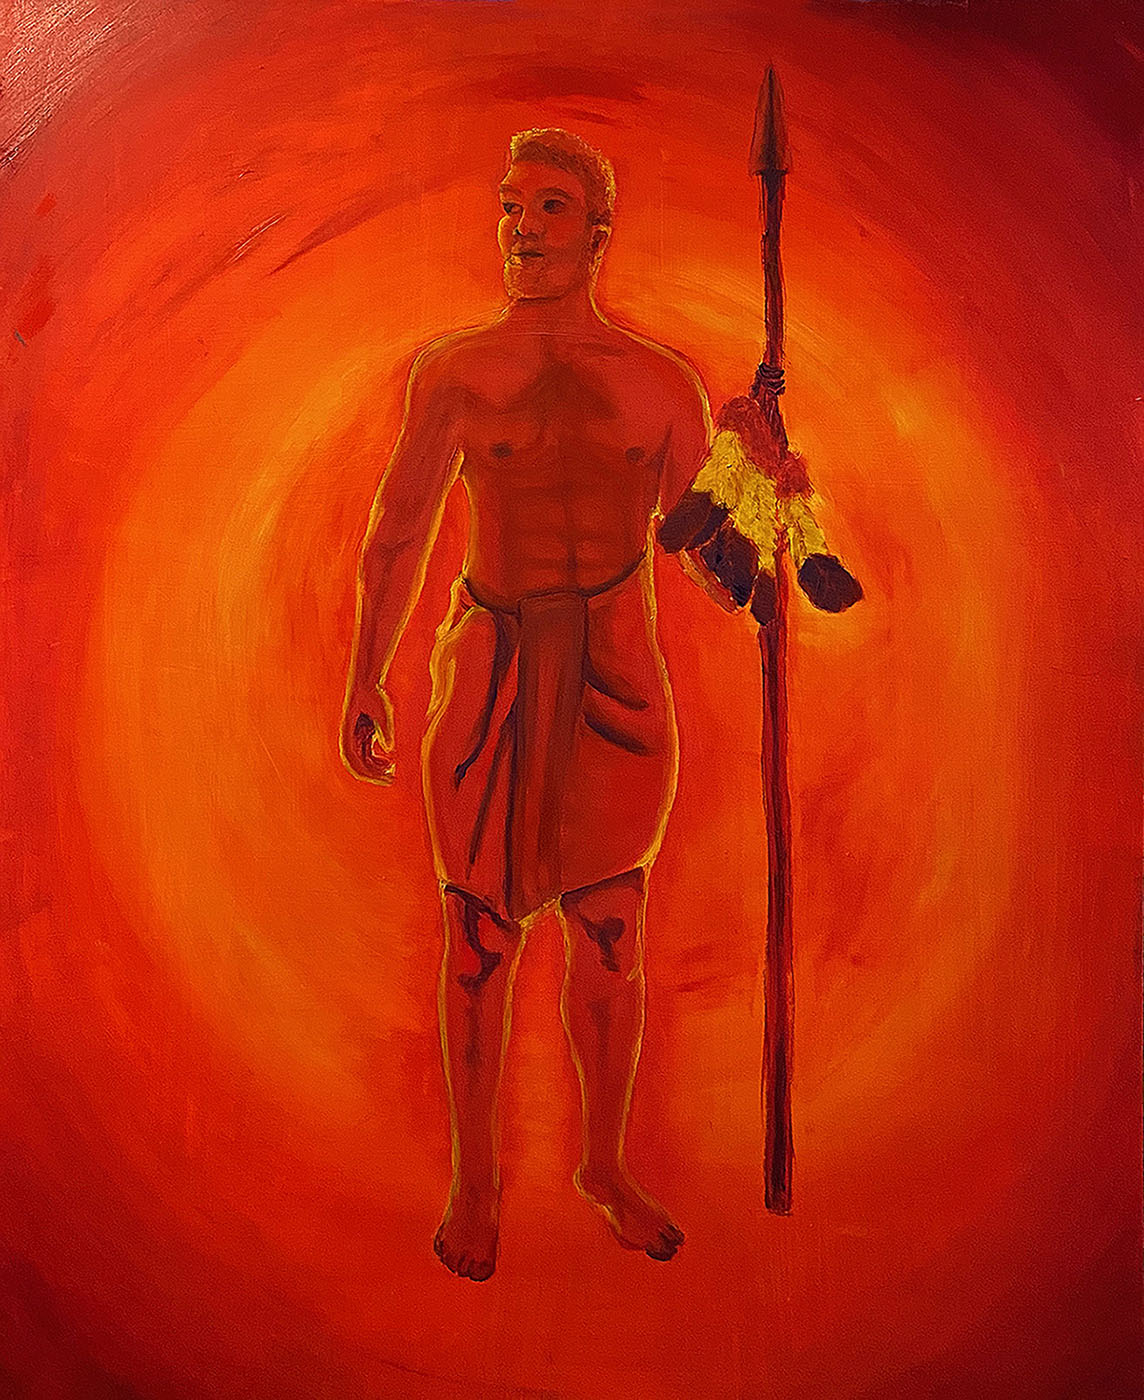 A deep warmth is exuding from a muscular standing male figure with a stern face looking towards the left. He is wearing a wrap around his waist, and holding a rugged spear with soft warm eagle feathers attached to it. Behind him a sunlike warmth spirals out to the end of the panel.